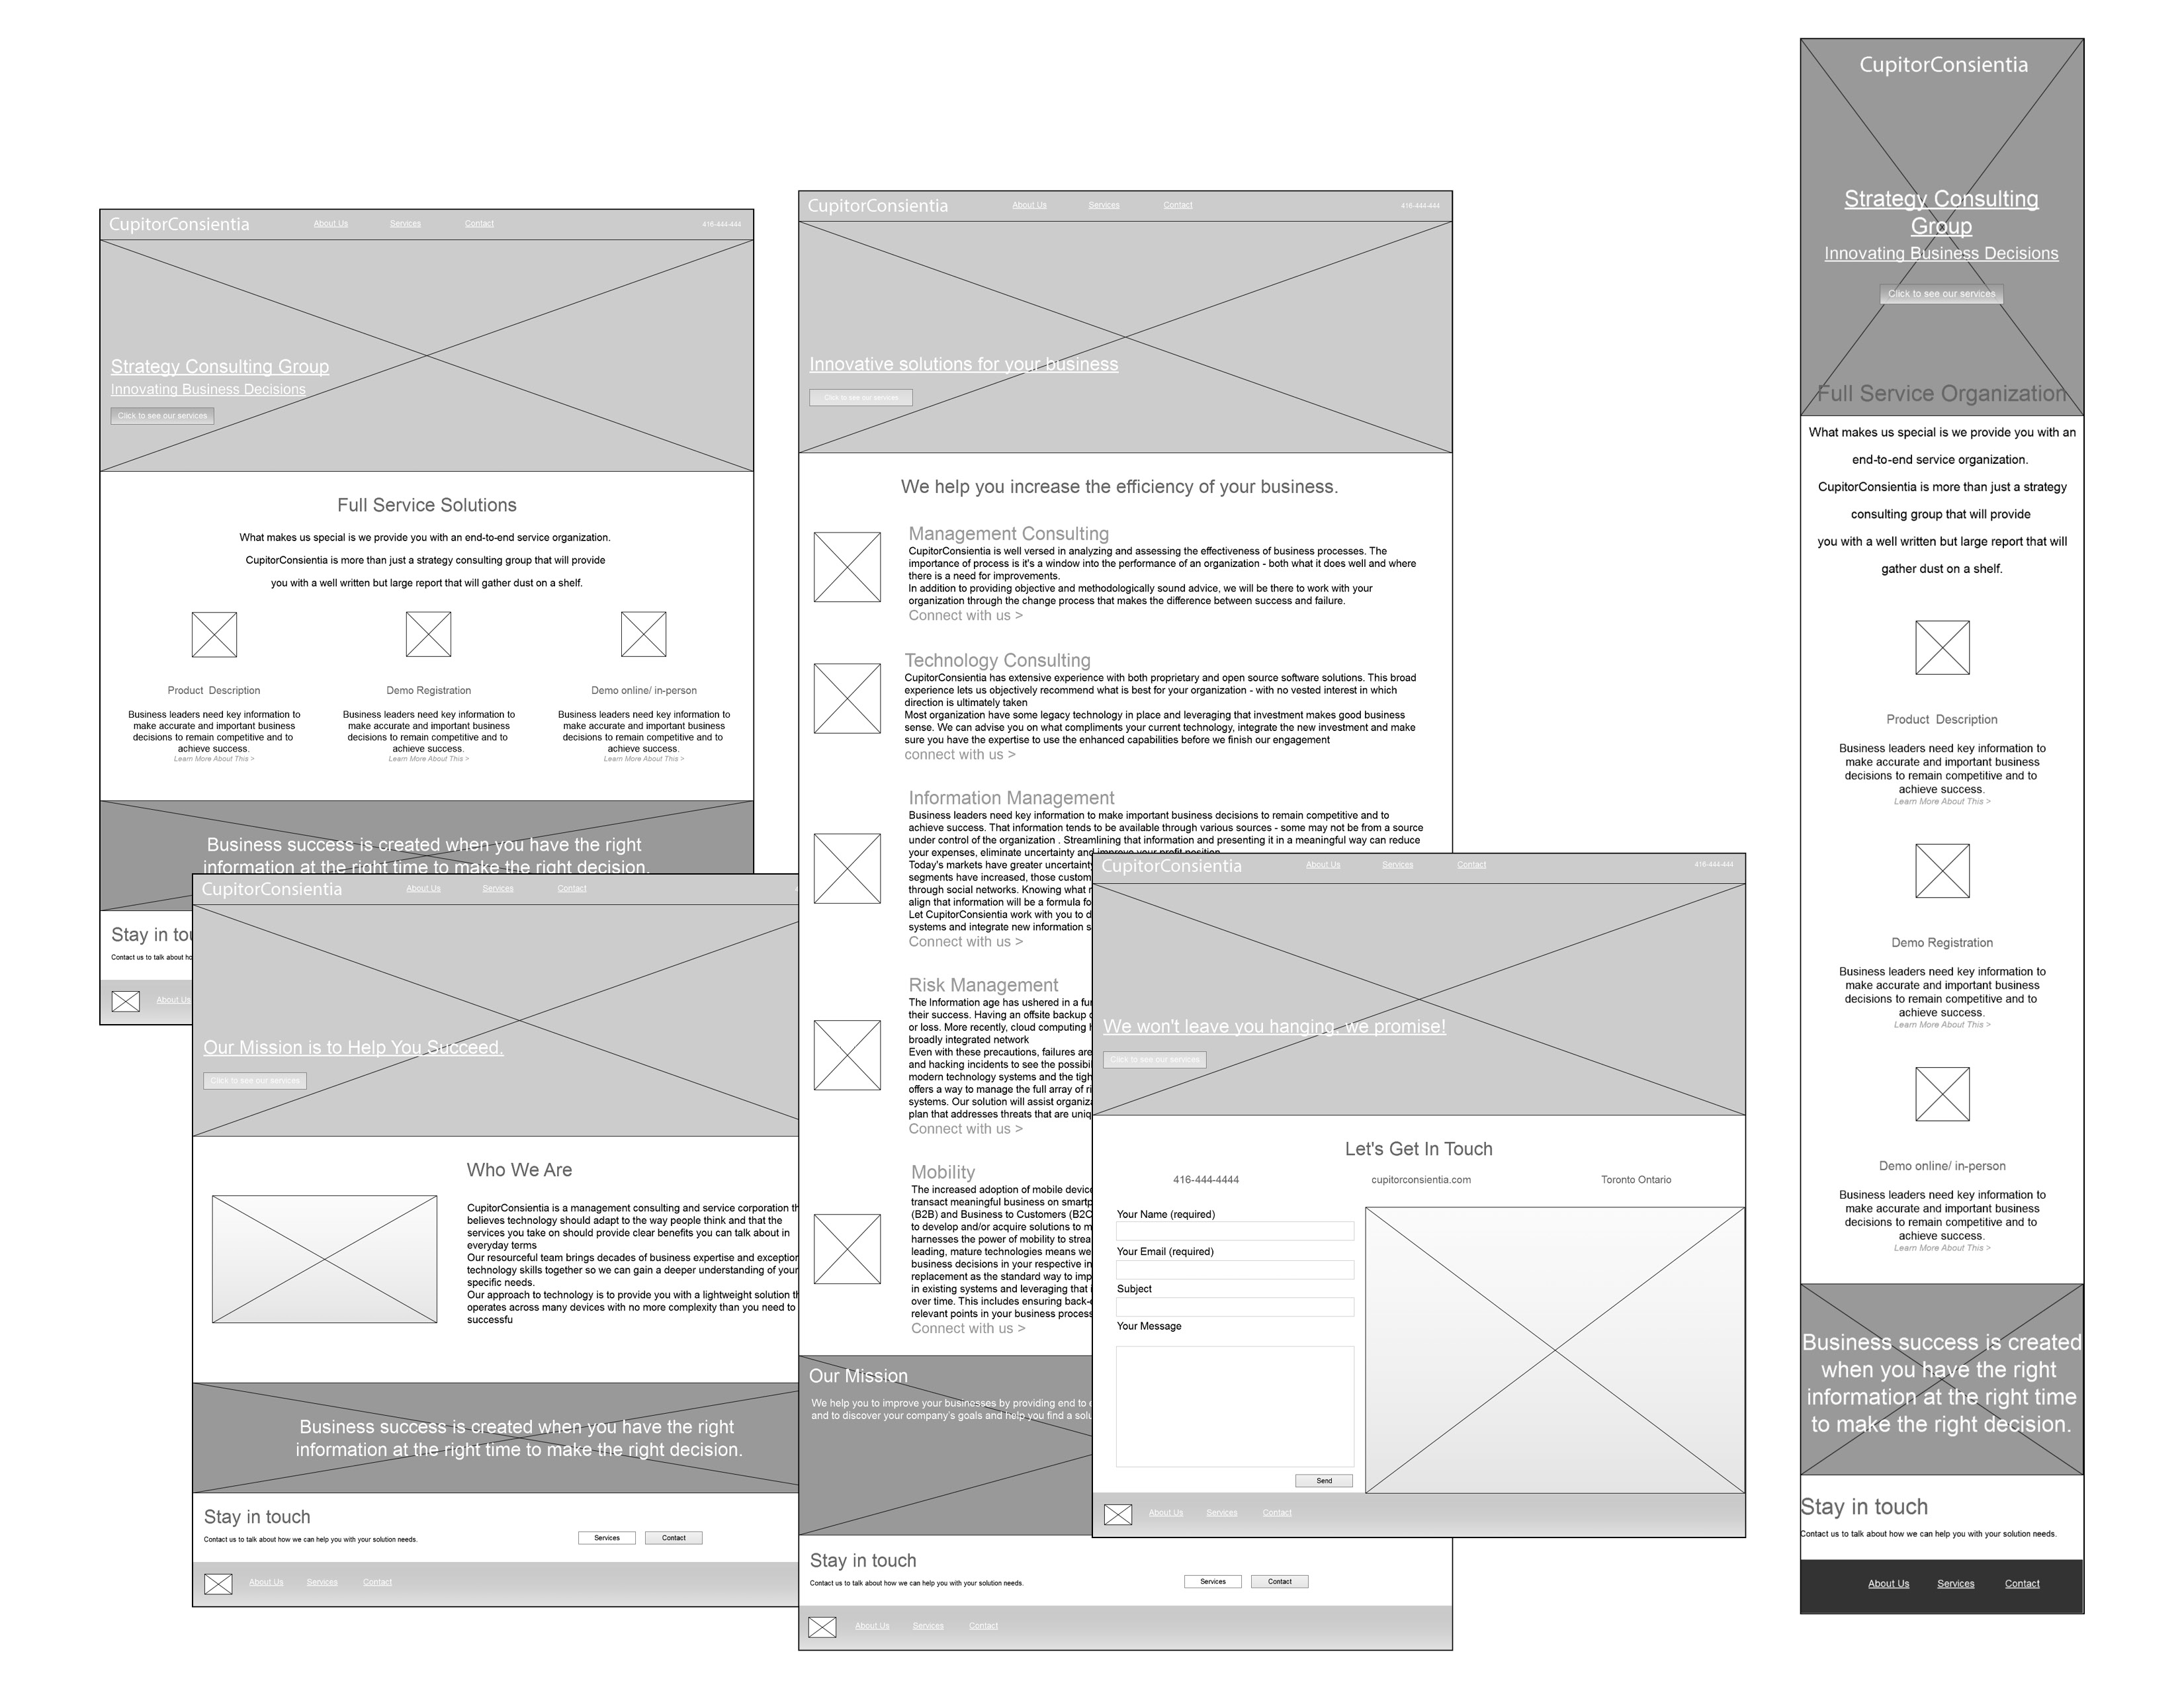 mary-evenou-cupitor-consientia-wireframe-design